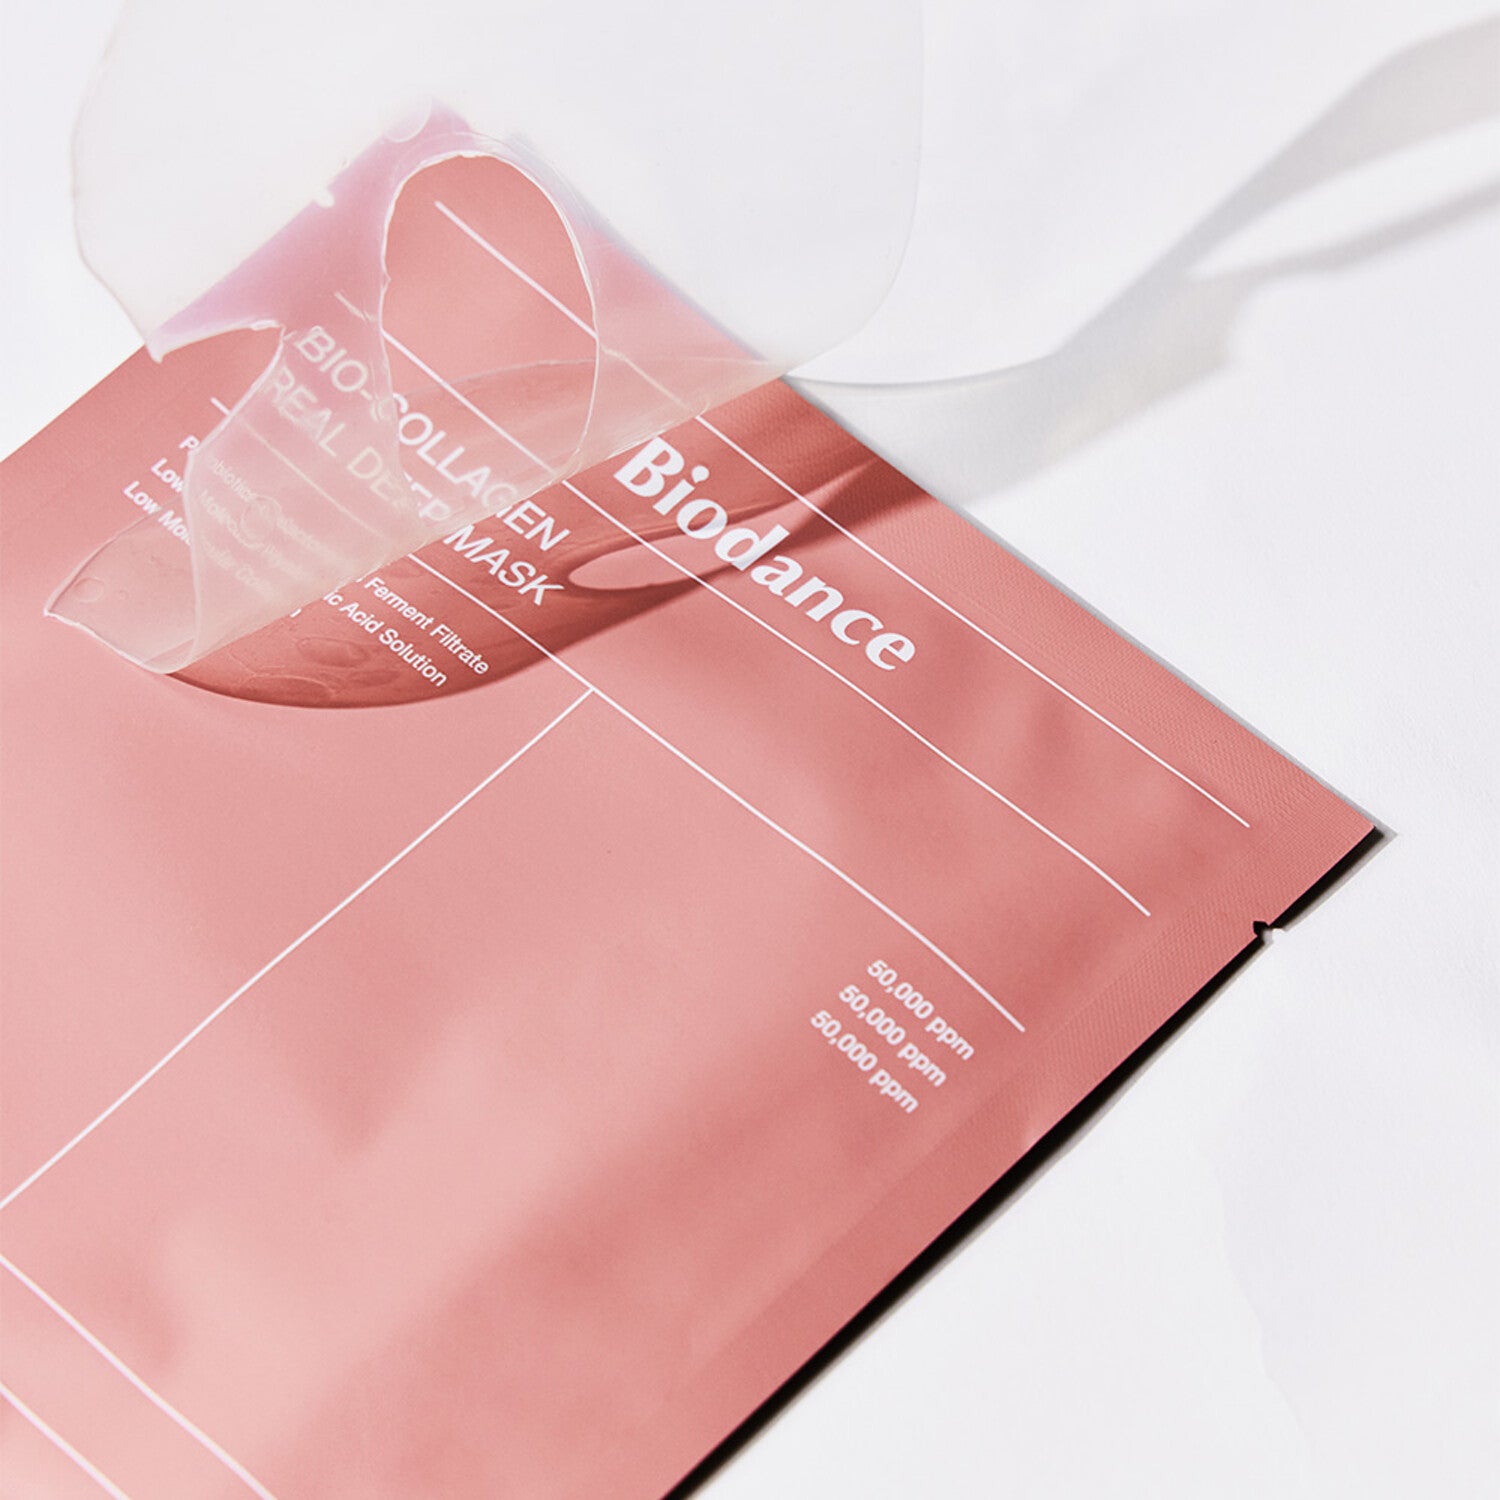 Packaging of Biodance Bio-Collagen Real Deep Mask 34g *8ea* with emphasis on collagen benefits.